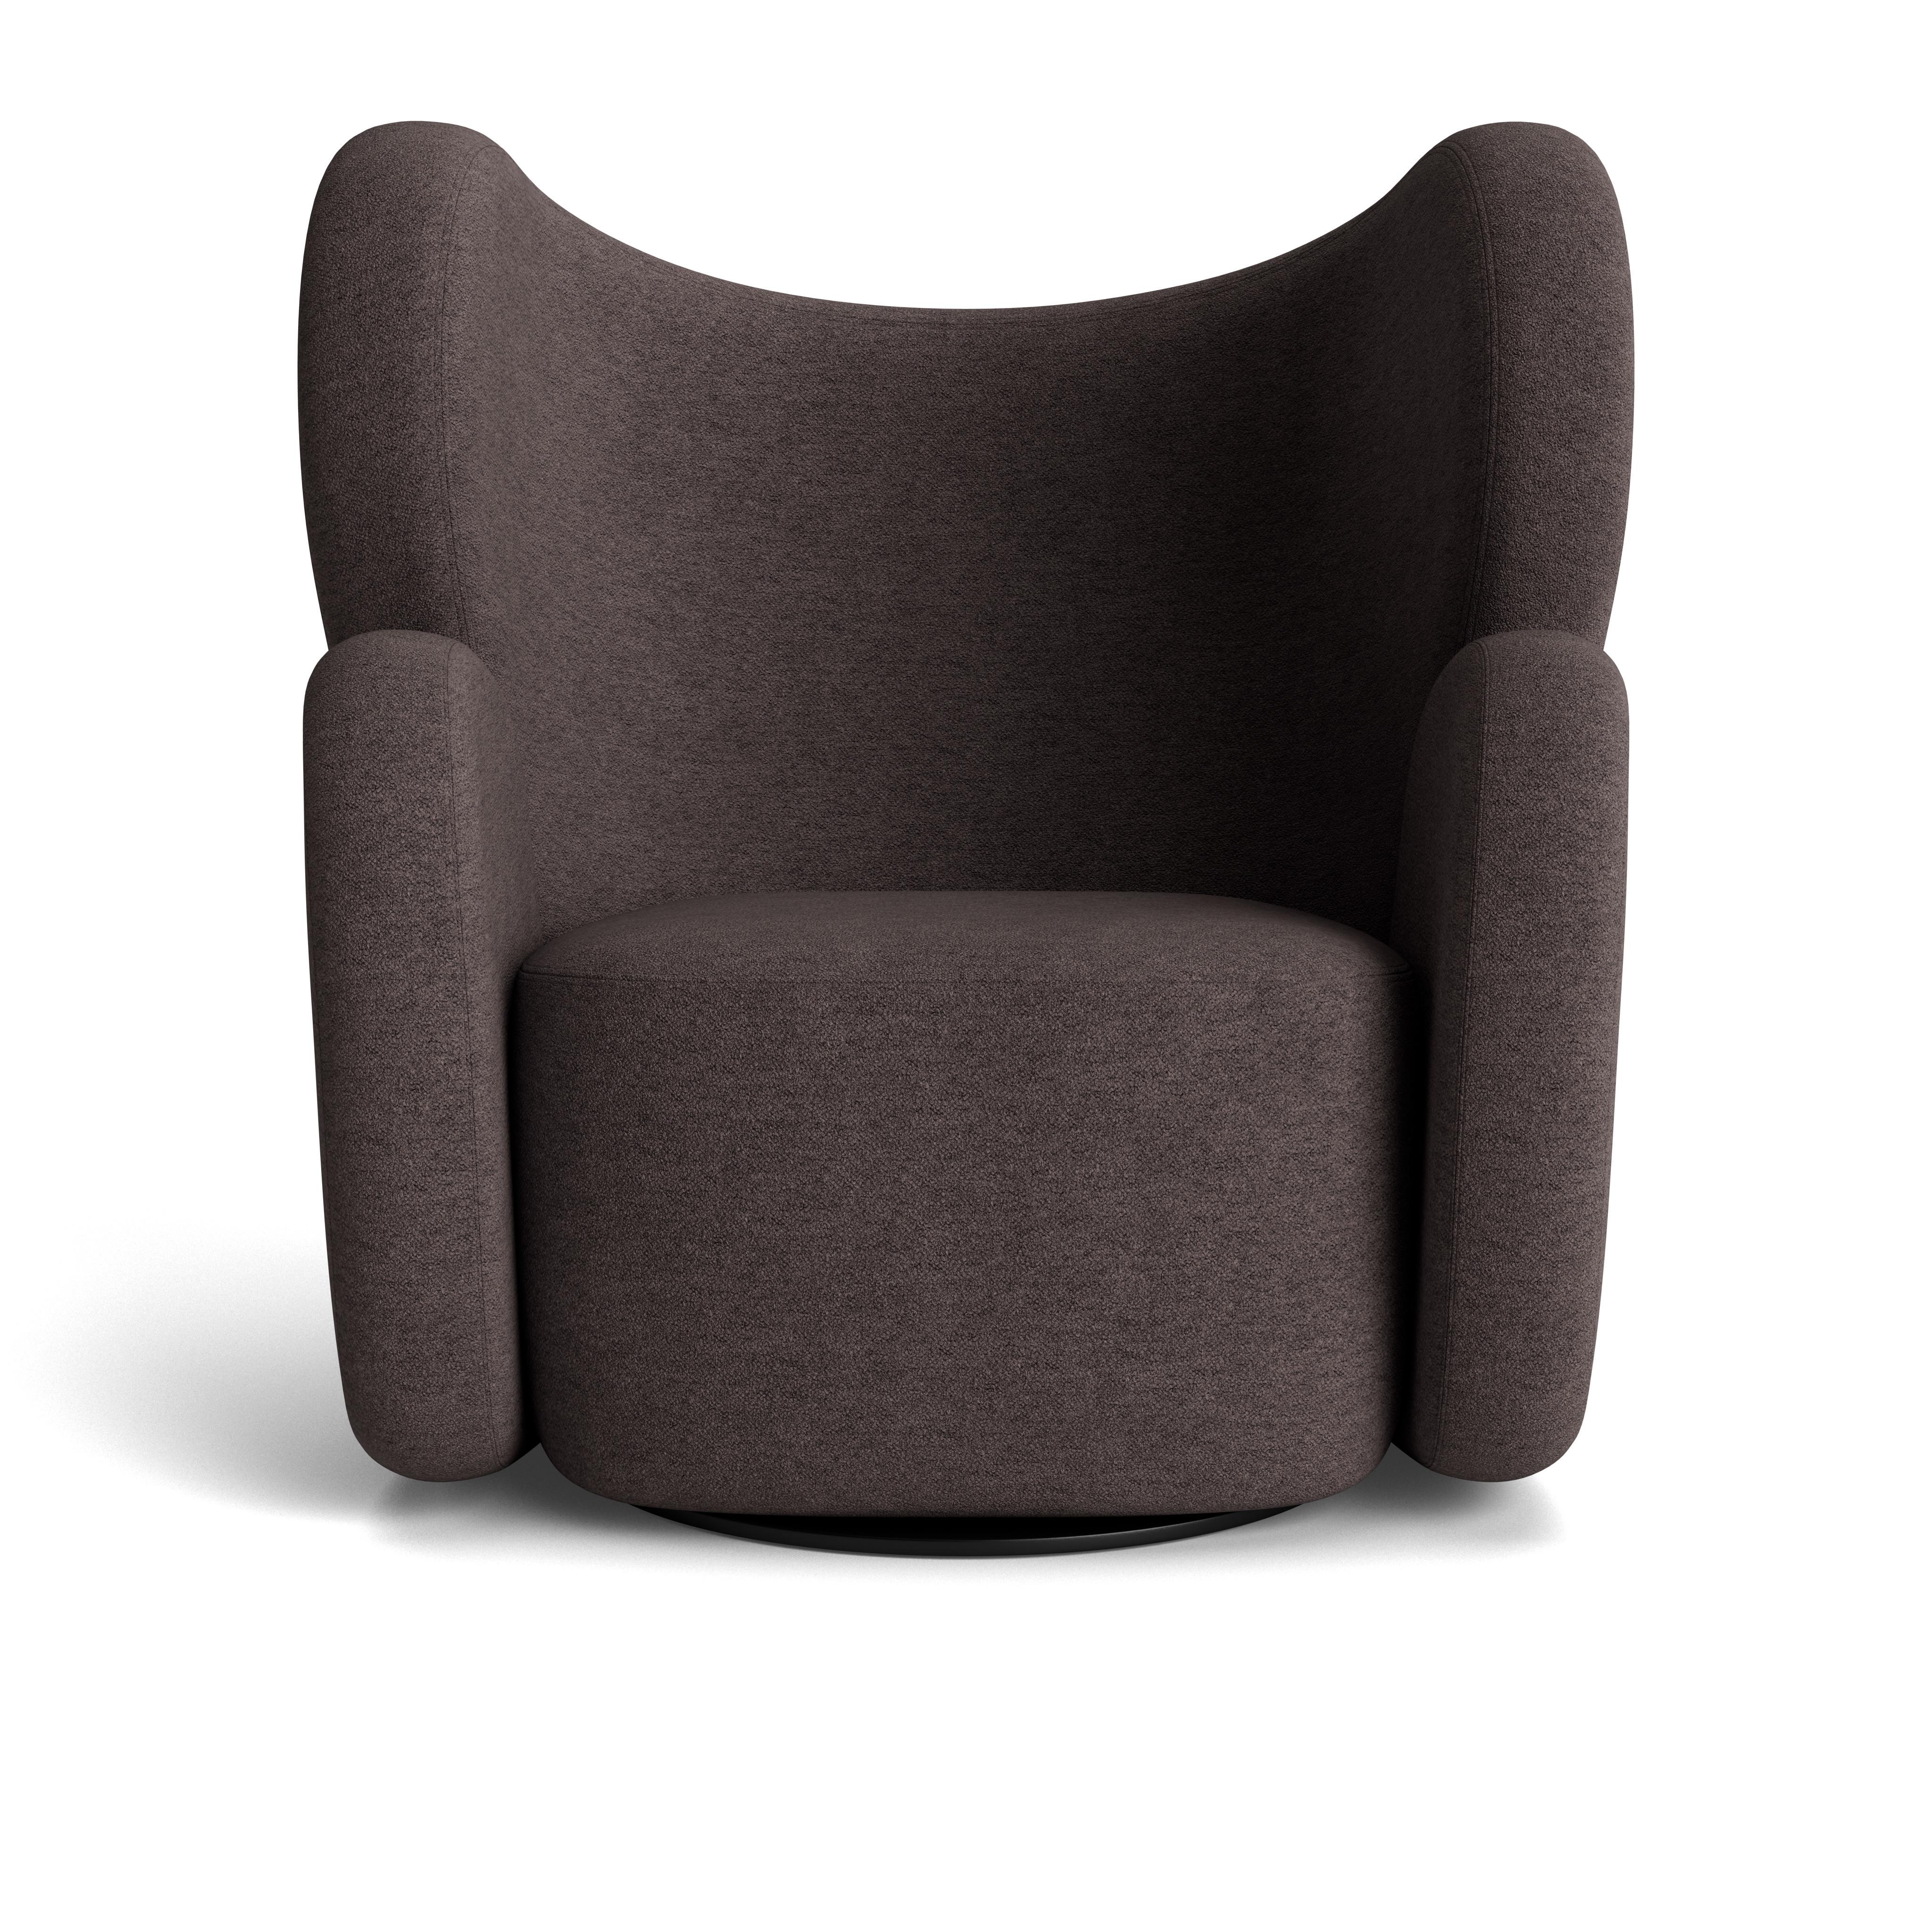 Big big chair armchair
Signed by Kristian Sofus Hansen and Tommy Hyldahl for Norr11. 

Model shown on the picture:
Fabric: Barnum Bouclé 11
Made in Italy

Appropriately named, the Big Big Chair is the bigger version of the compact Little Big